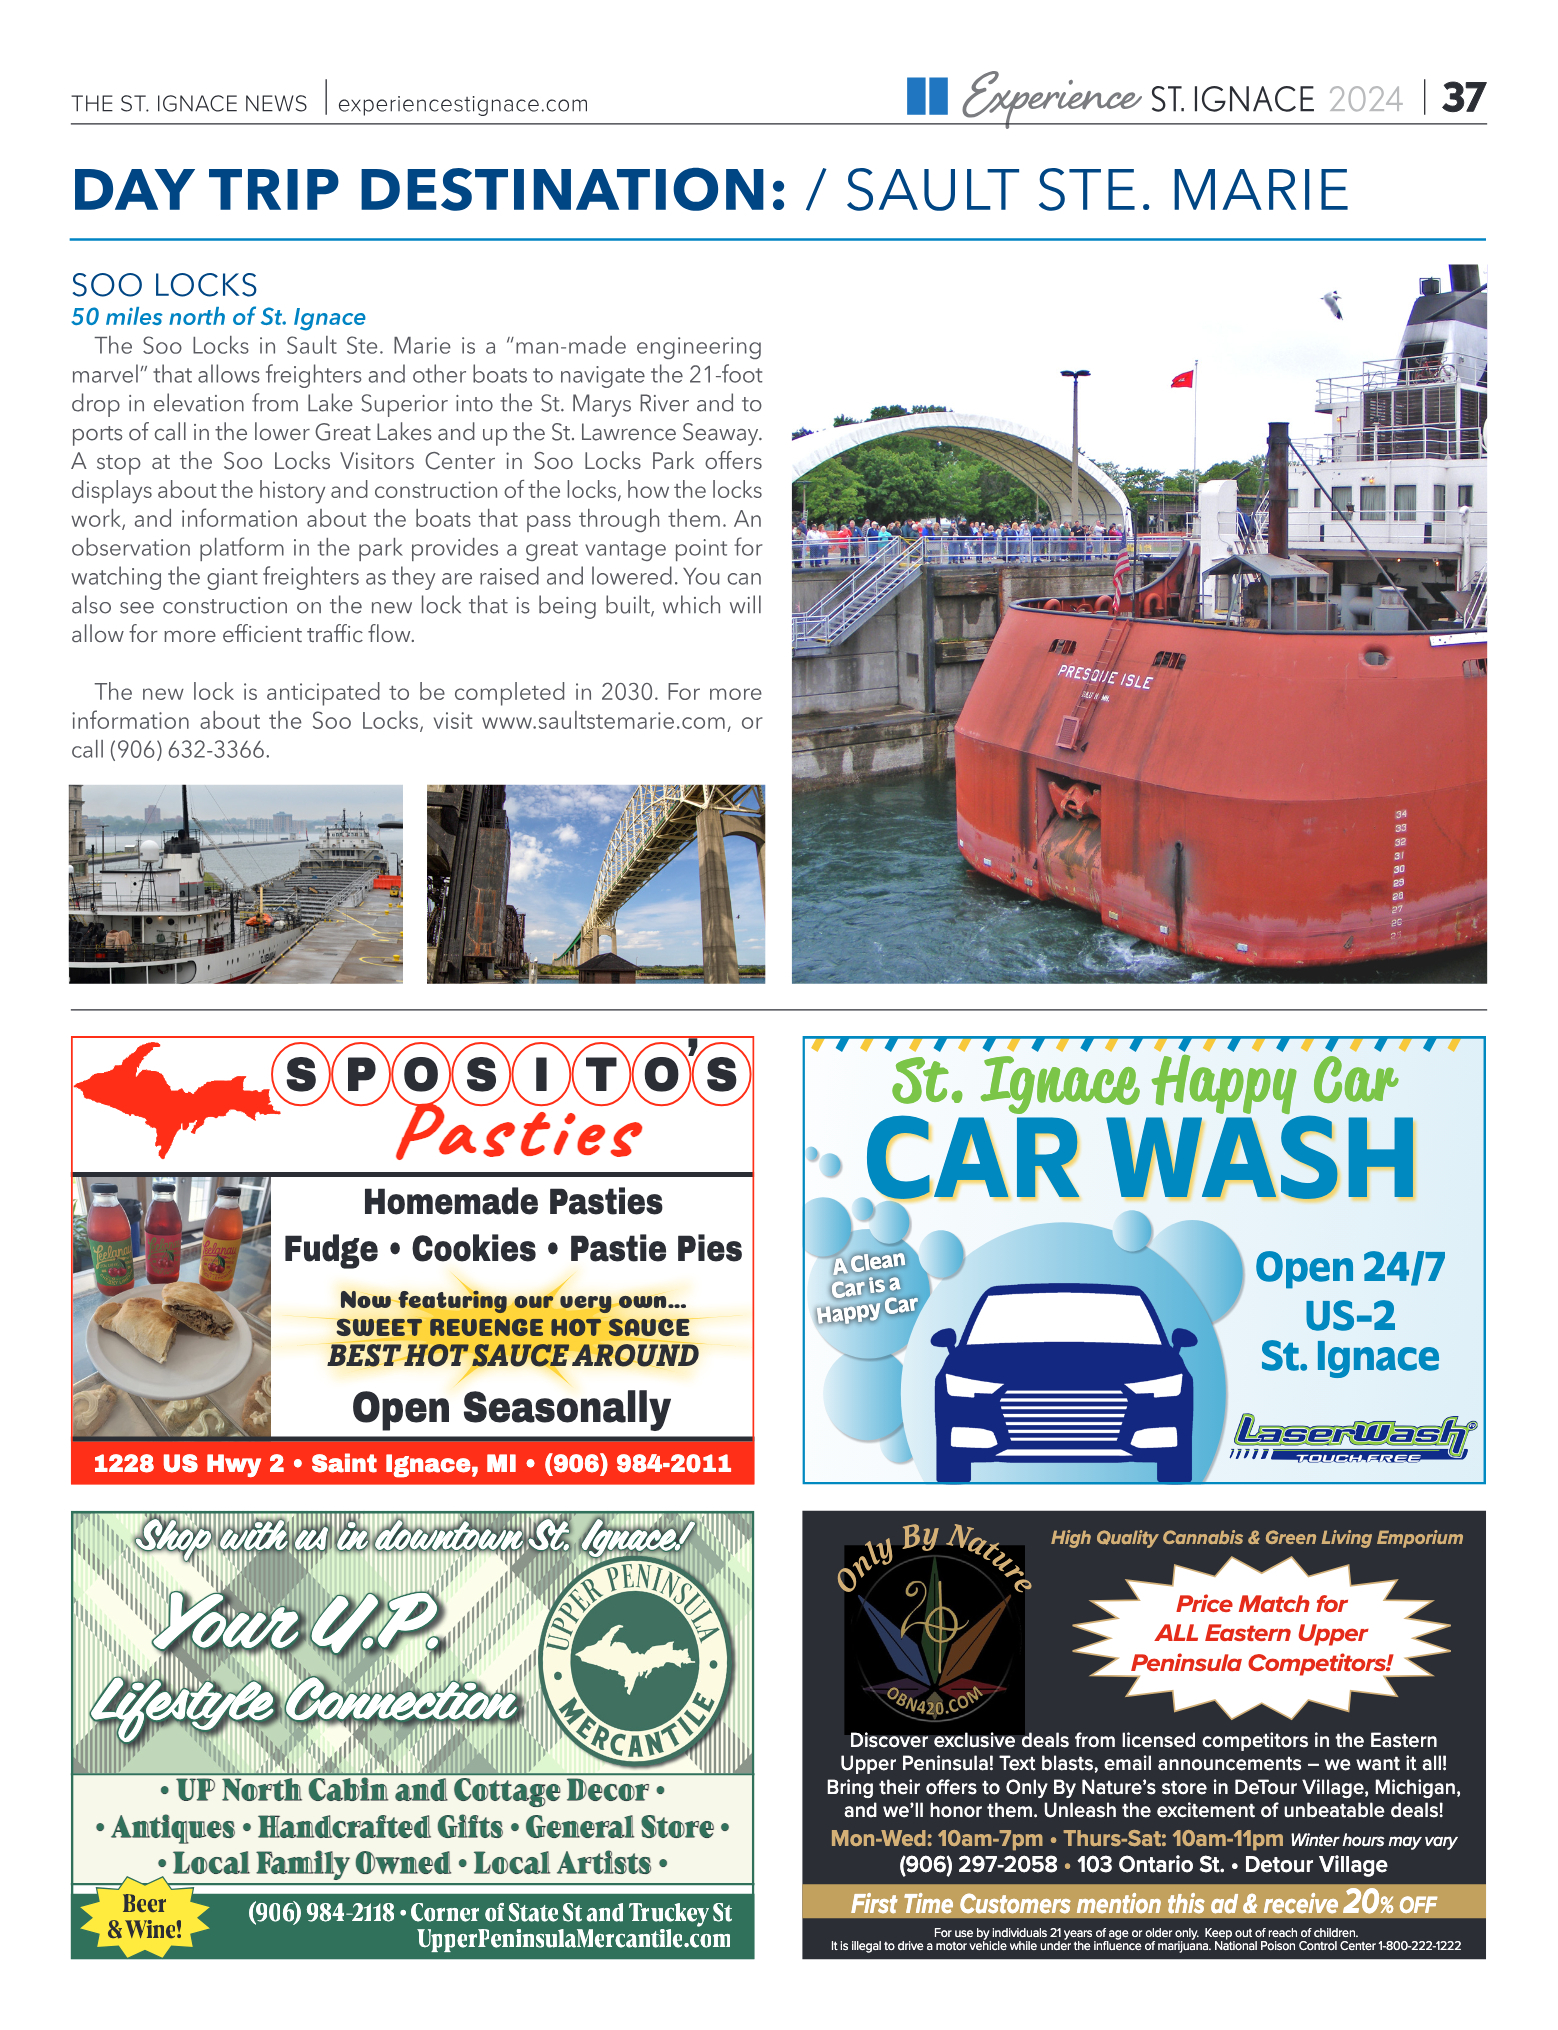 Experience St. Ignace - Guest Travel Guide 2024 - page 37